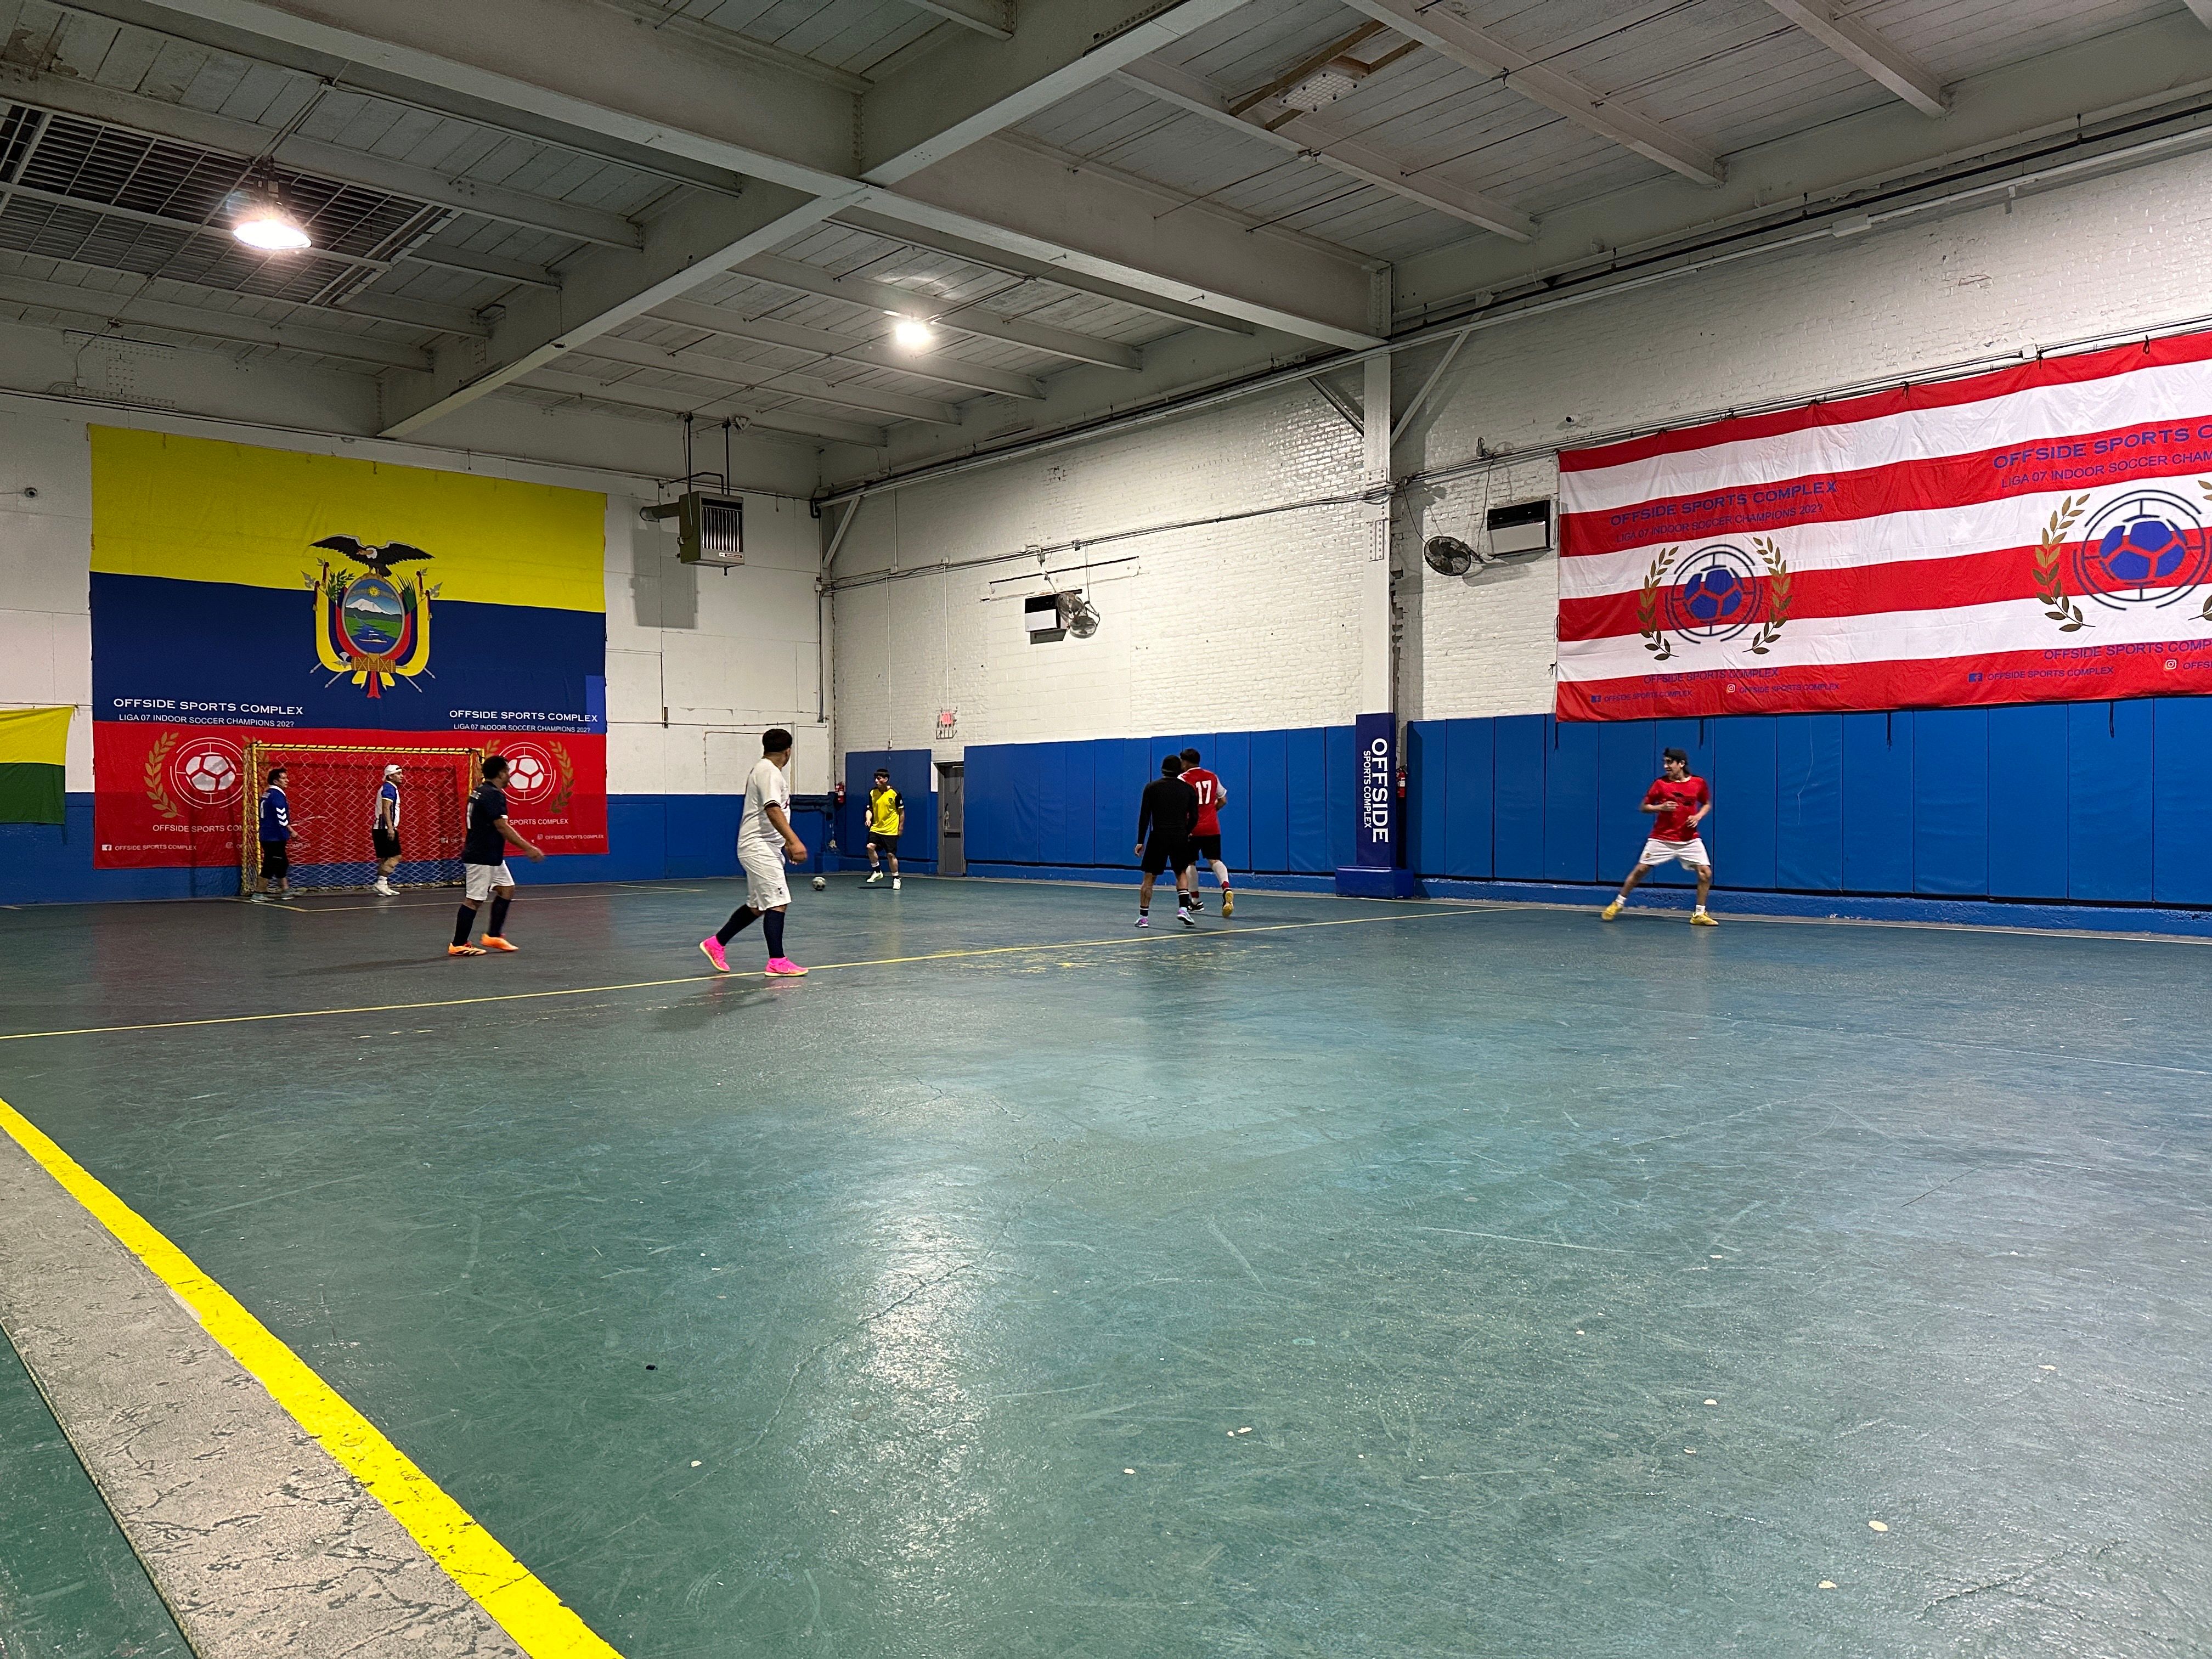 Offside Sports Complex Bridging Continents Together